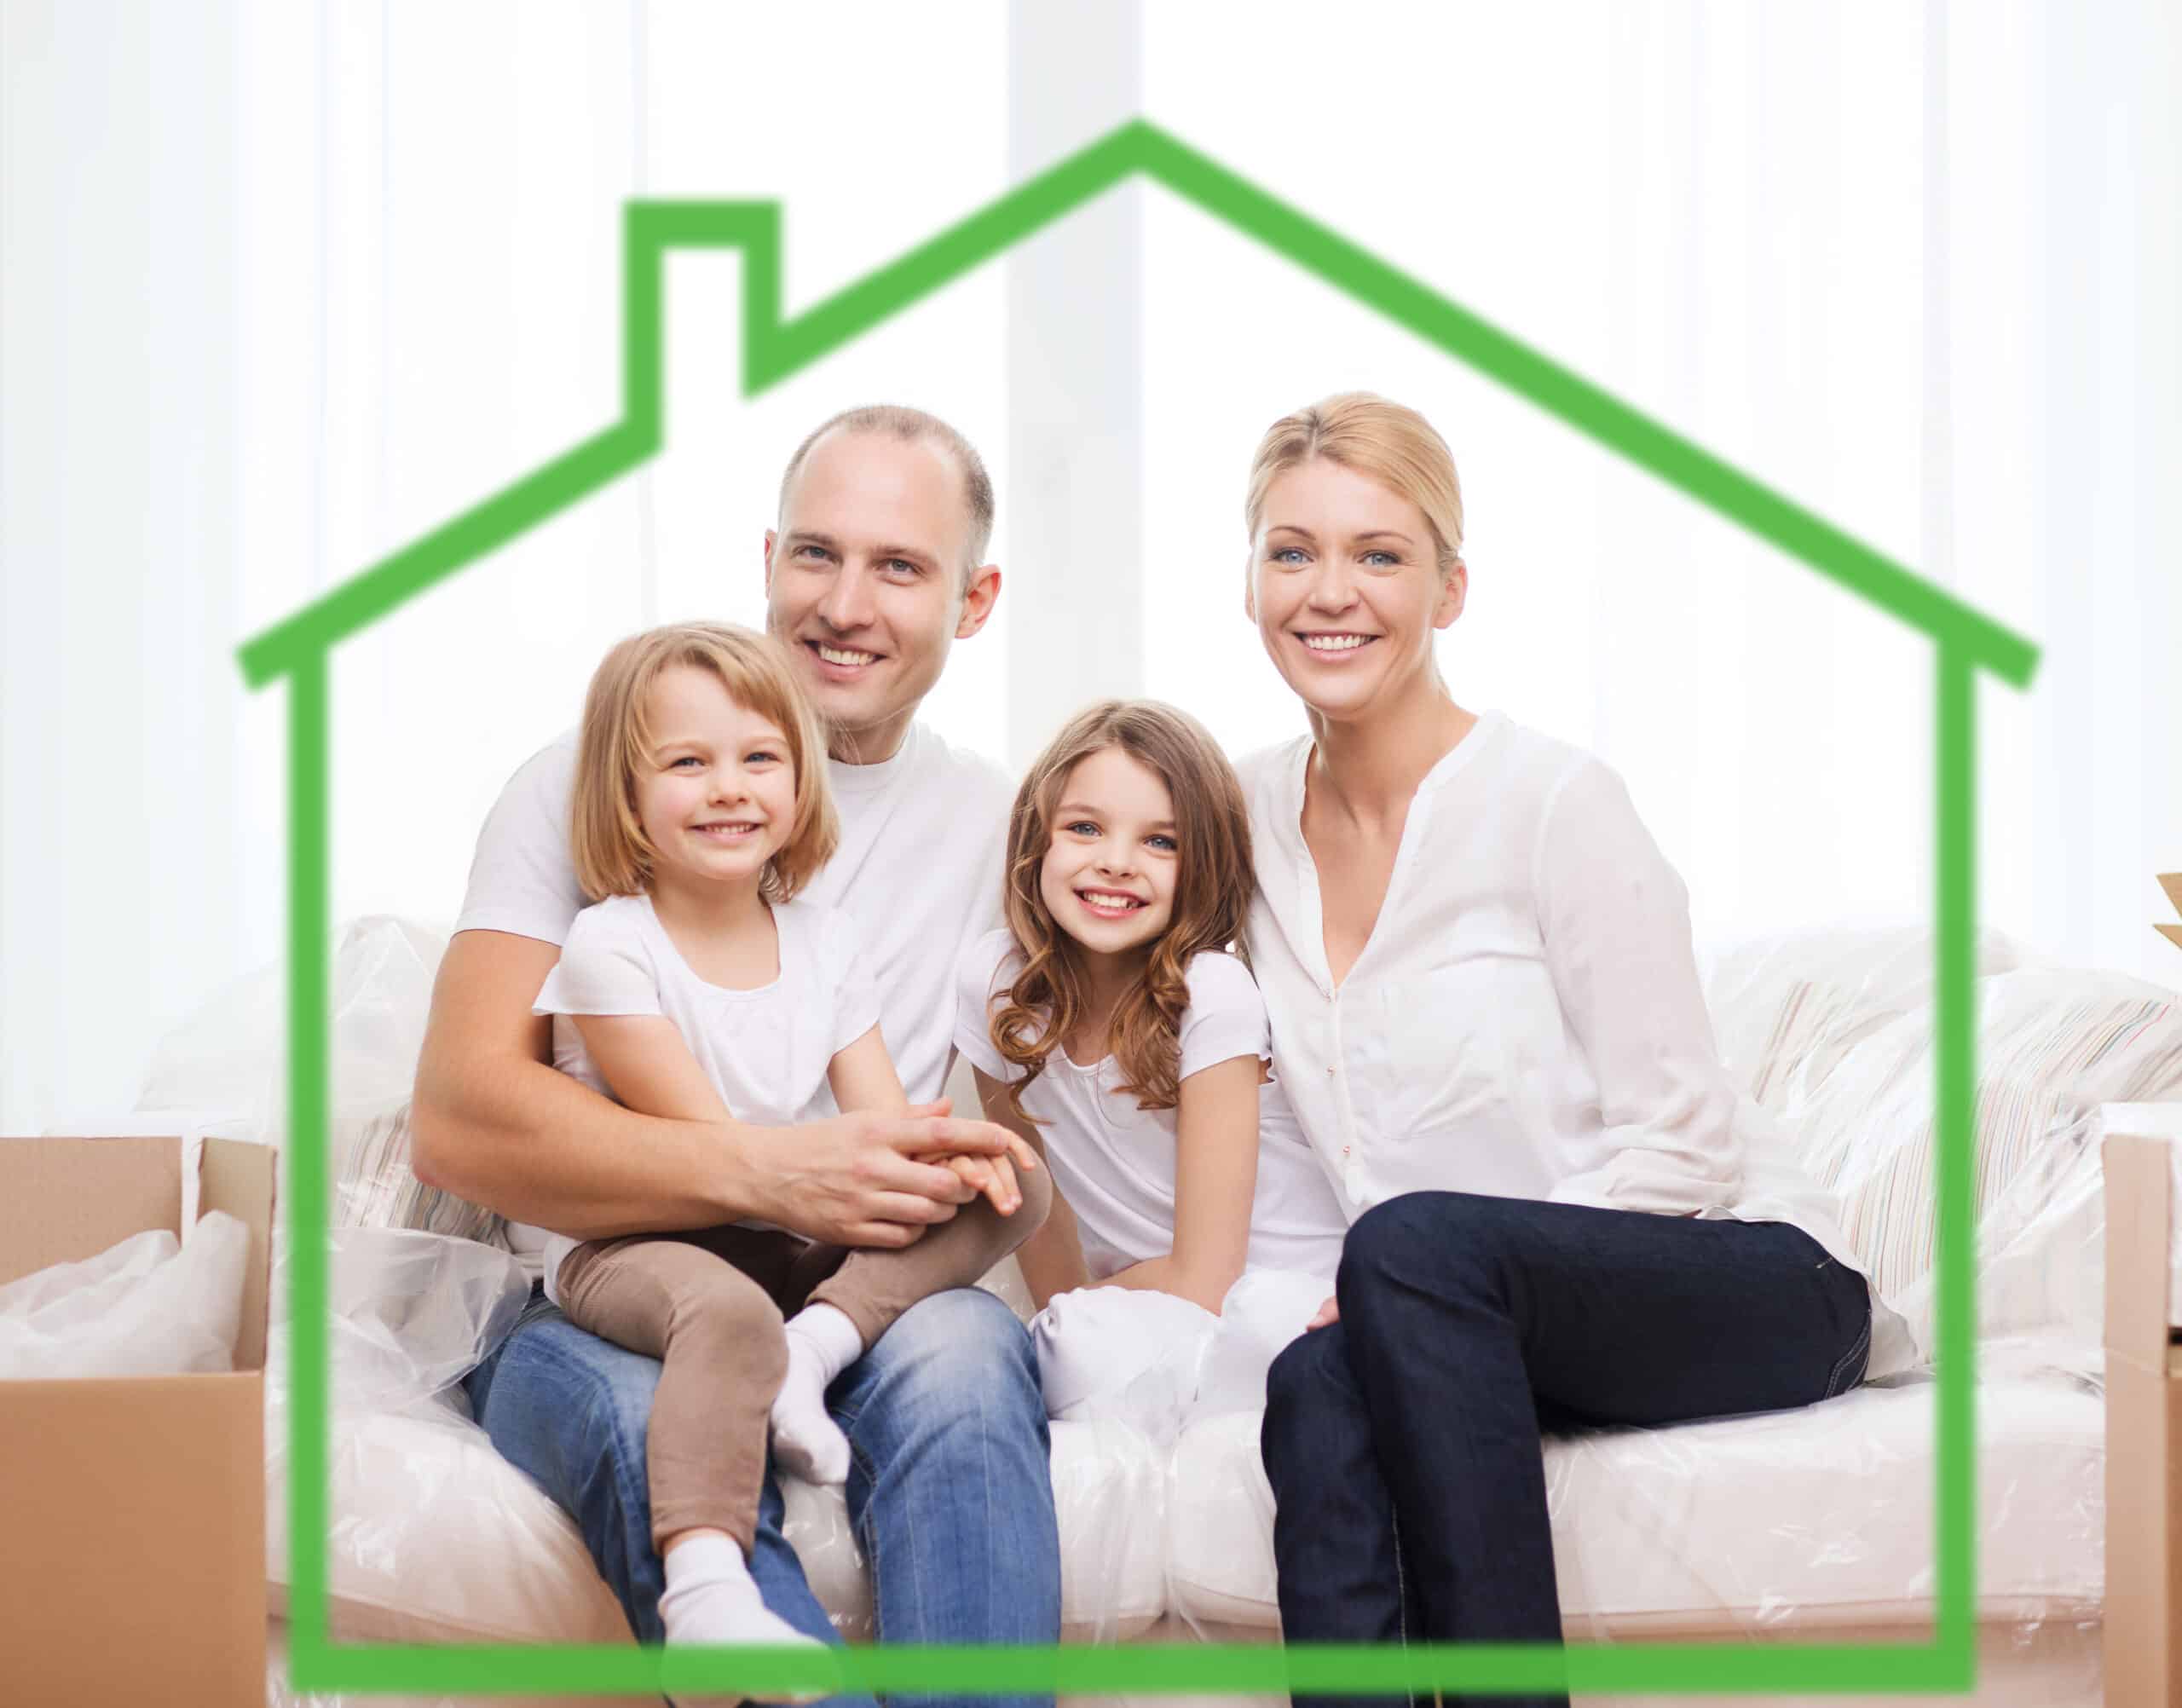 family, children, accommodation and home concept - smiling parents and two little girls at home behind green house symbol